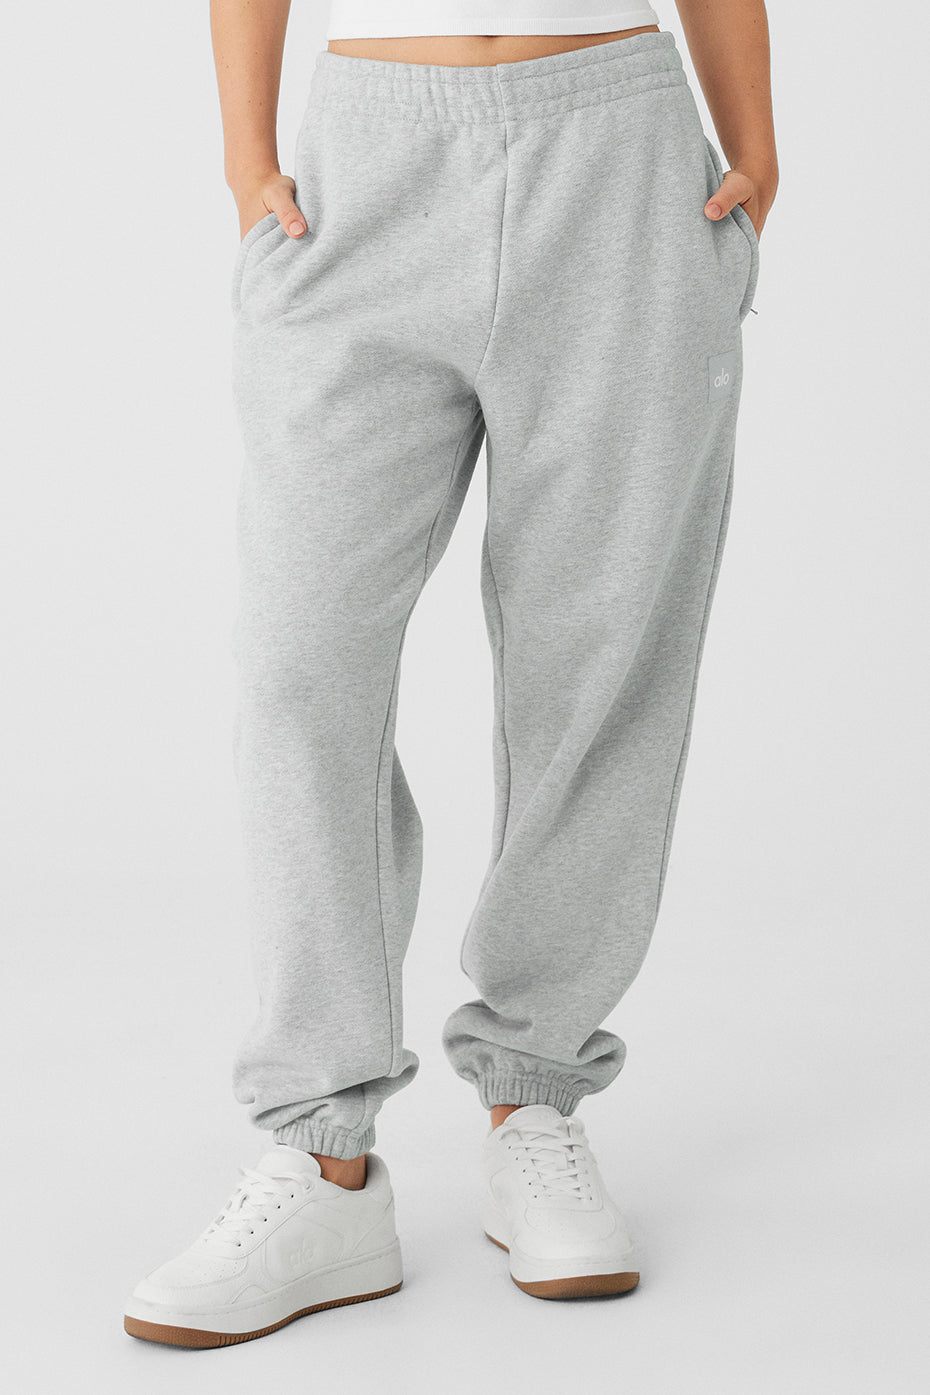 The Alo Yoga Muse Sweatpant Set Is Lightweight and Doesn't Wrinkle